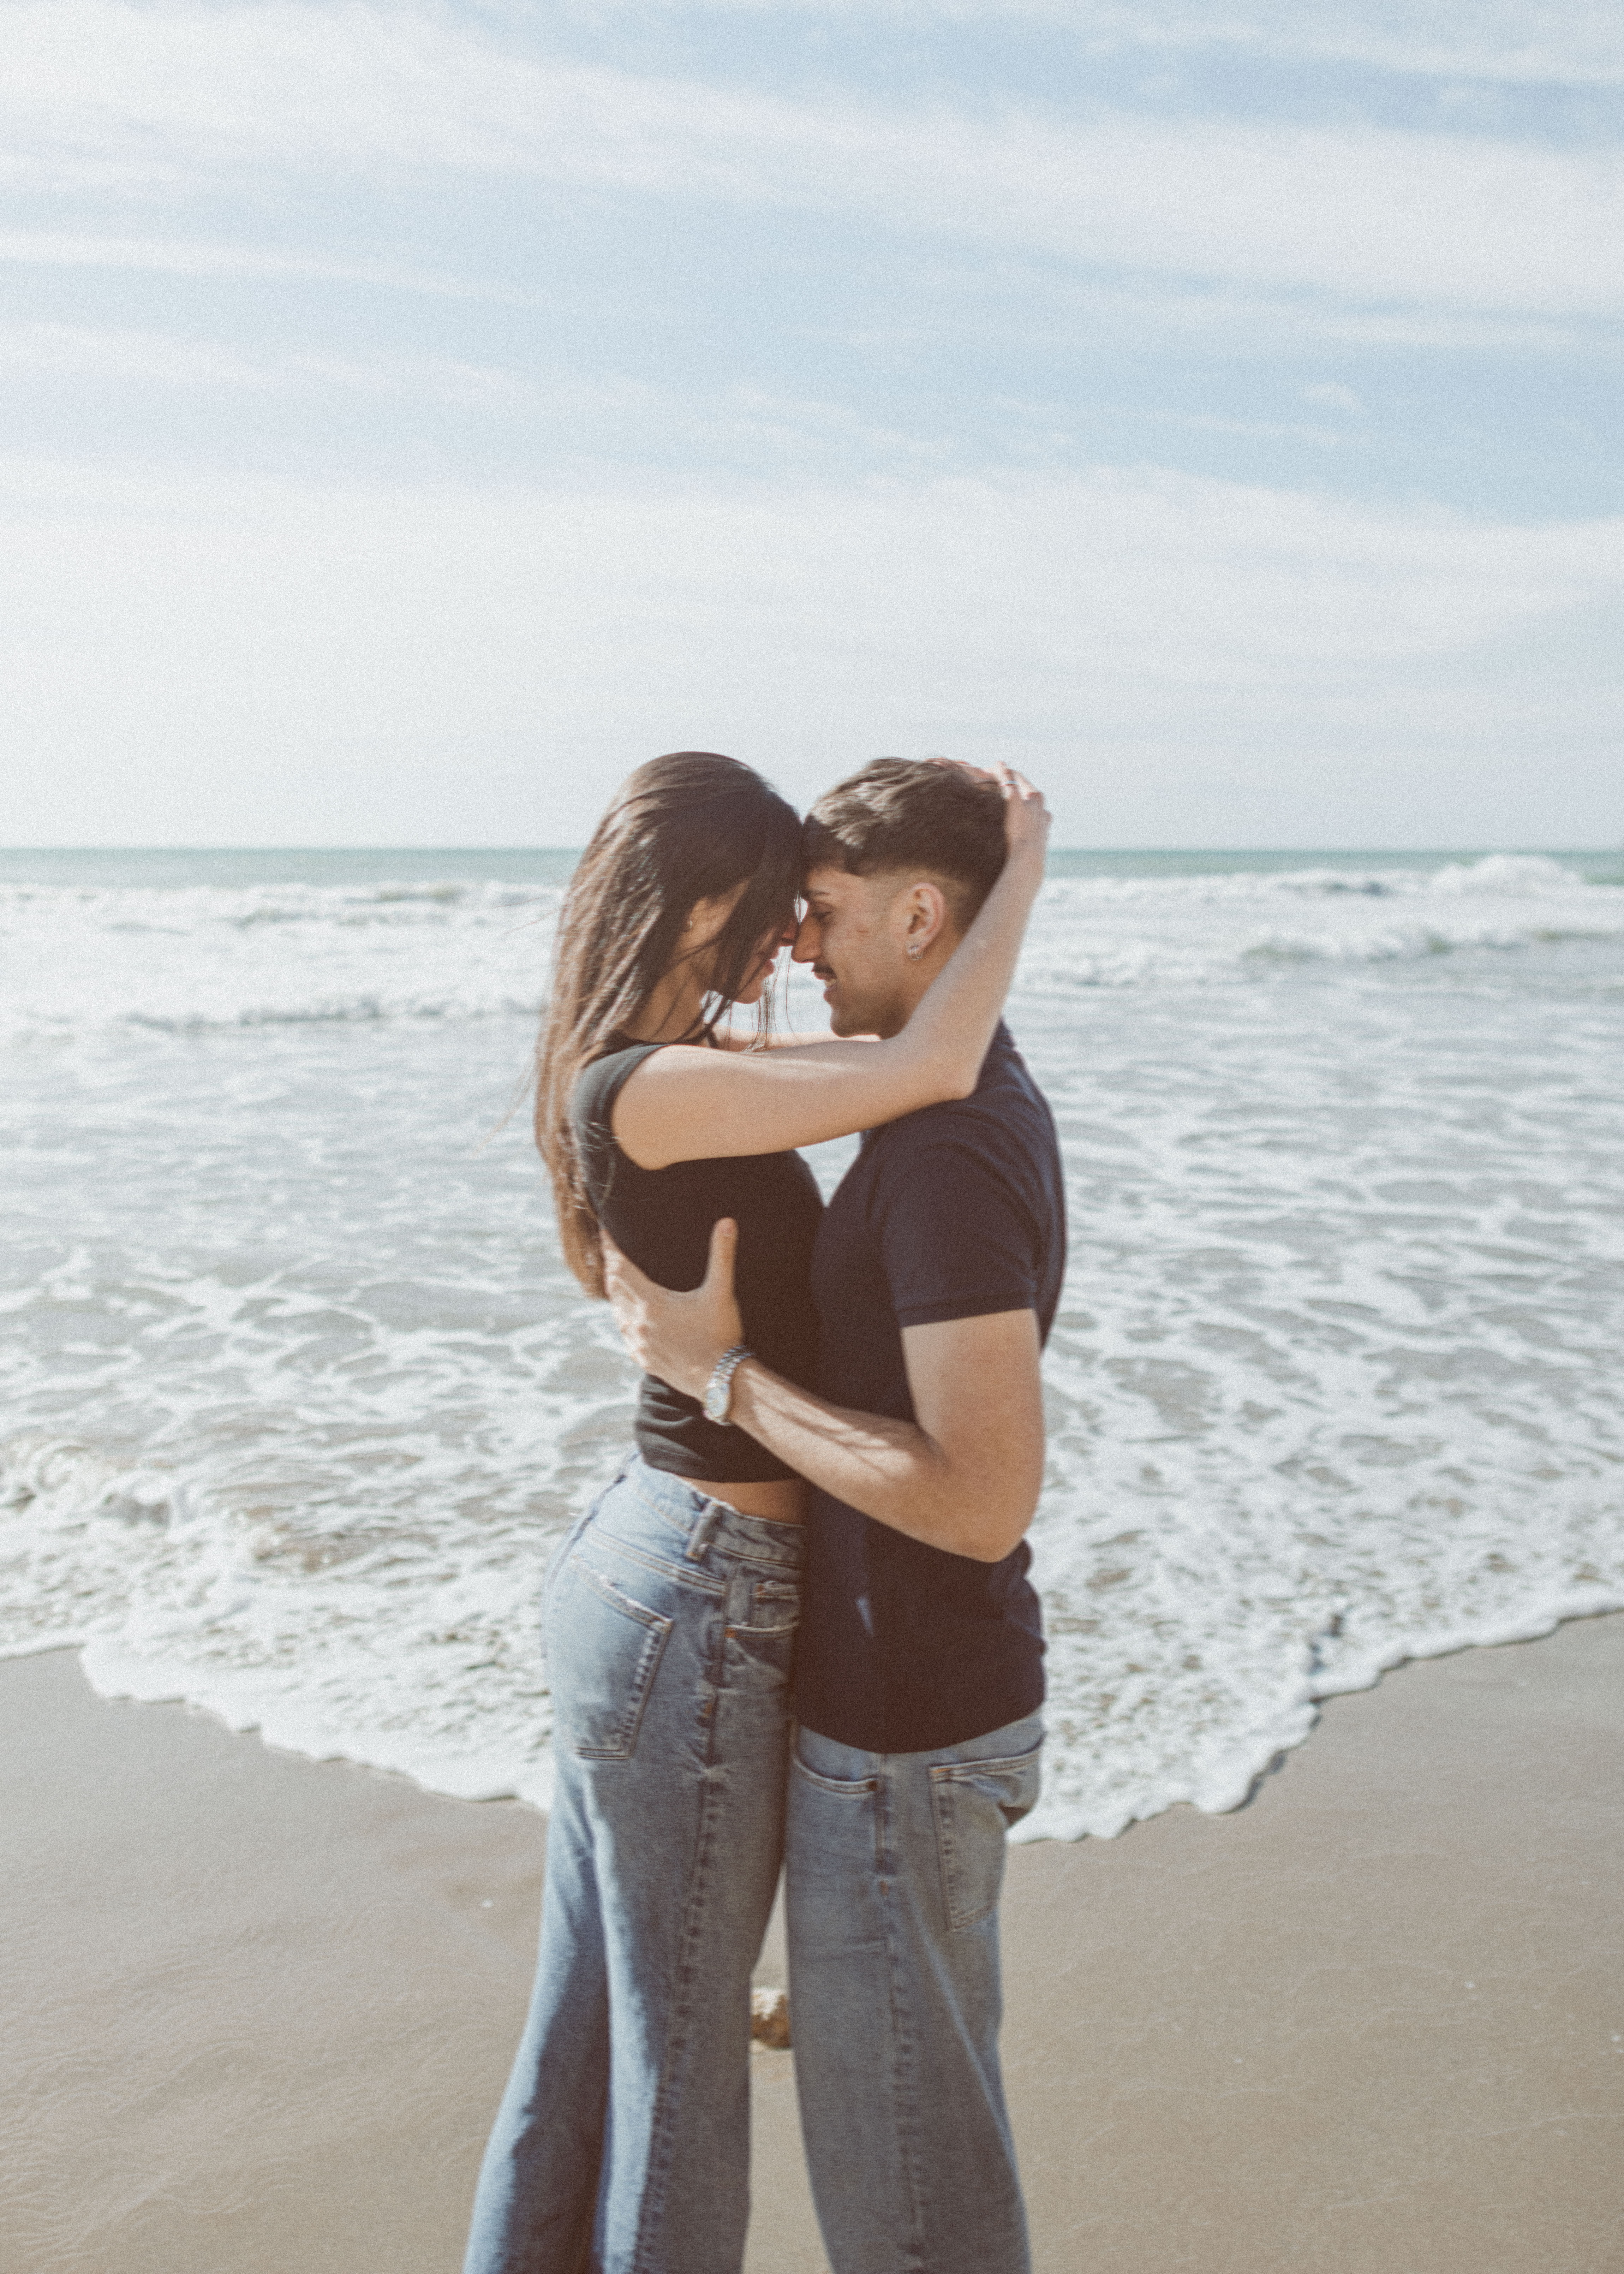 Shoreline Whispers: Artistic Beach Couple Photography in Sitges